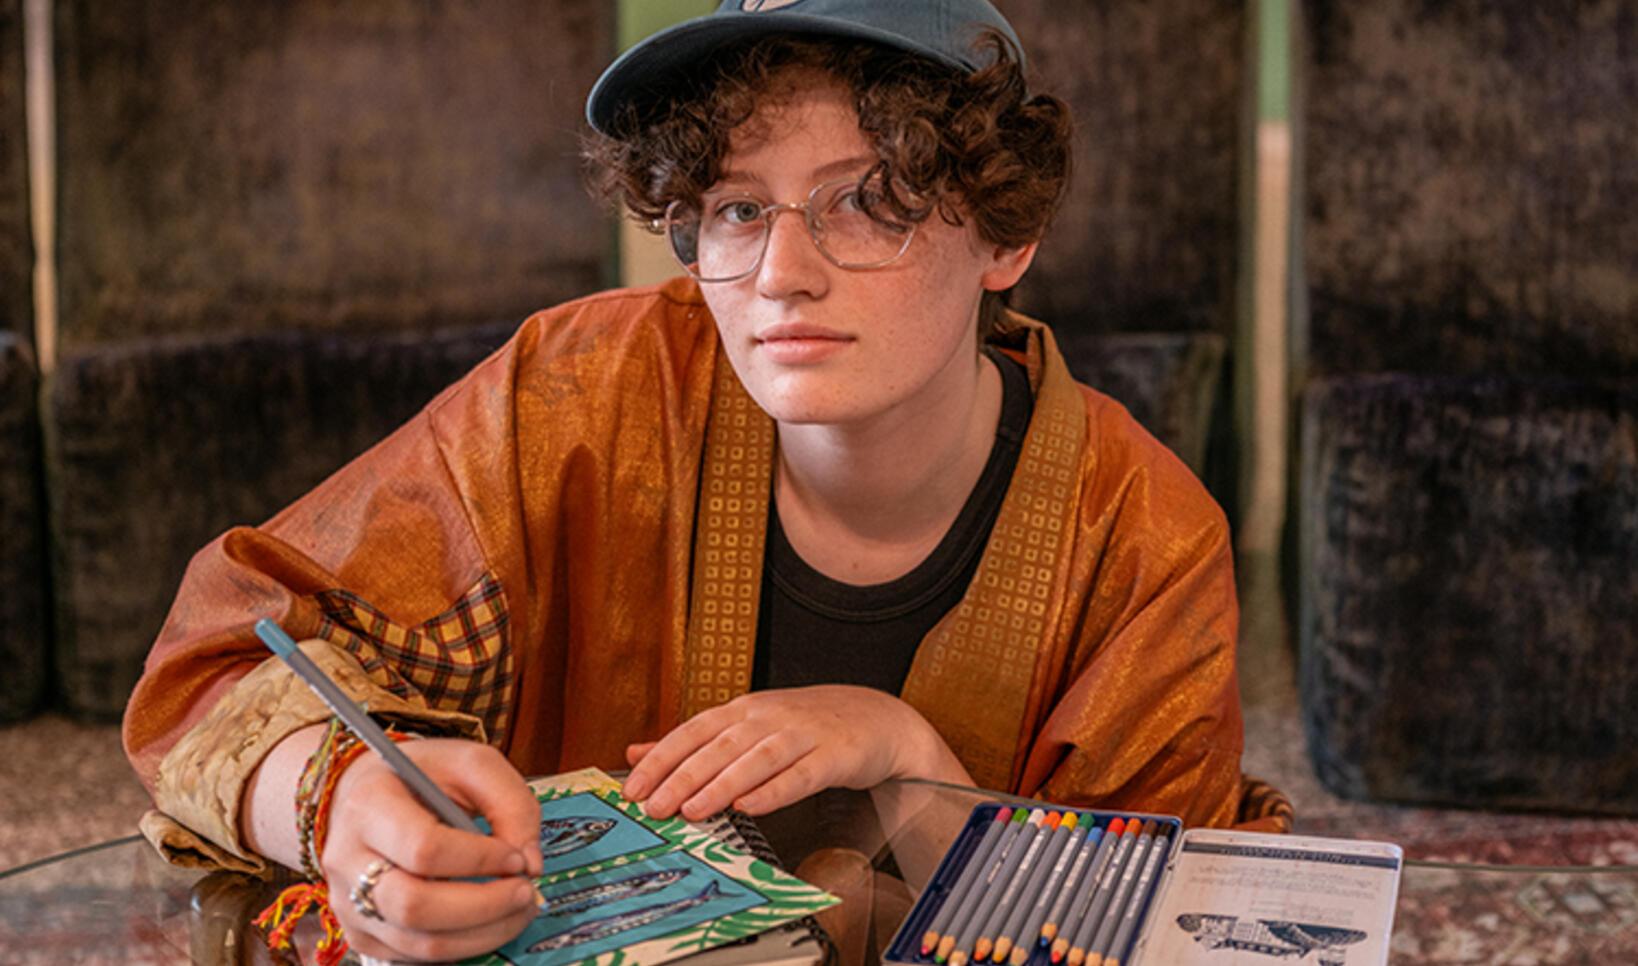 Student sits at a shiny table, looking directly at camera, as they work on a sketchbook. The student is wearing an orange shirt and blue baseball cap. 